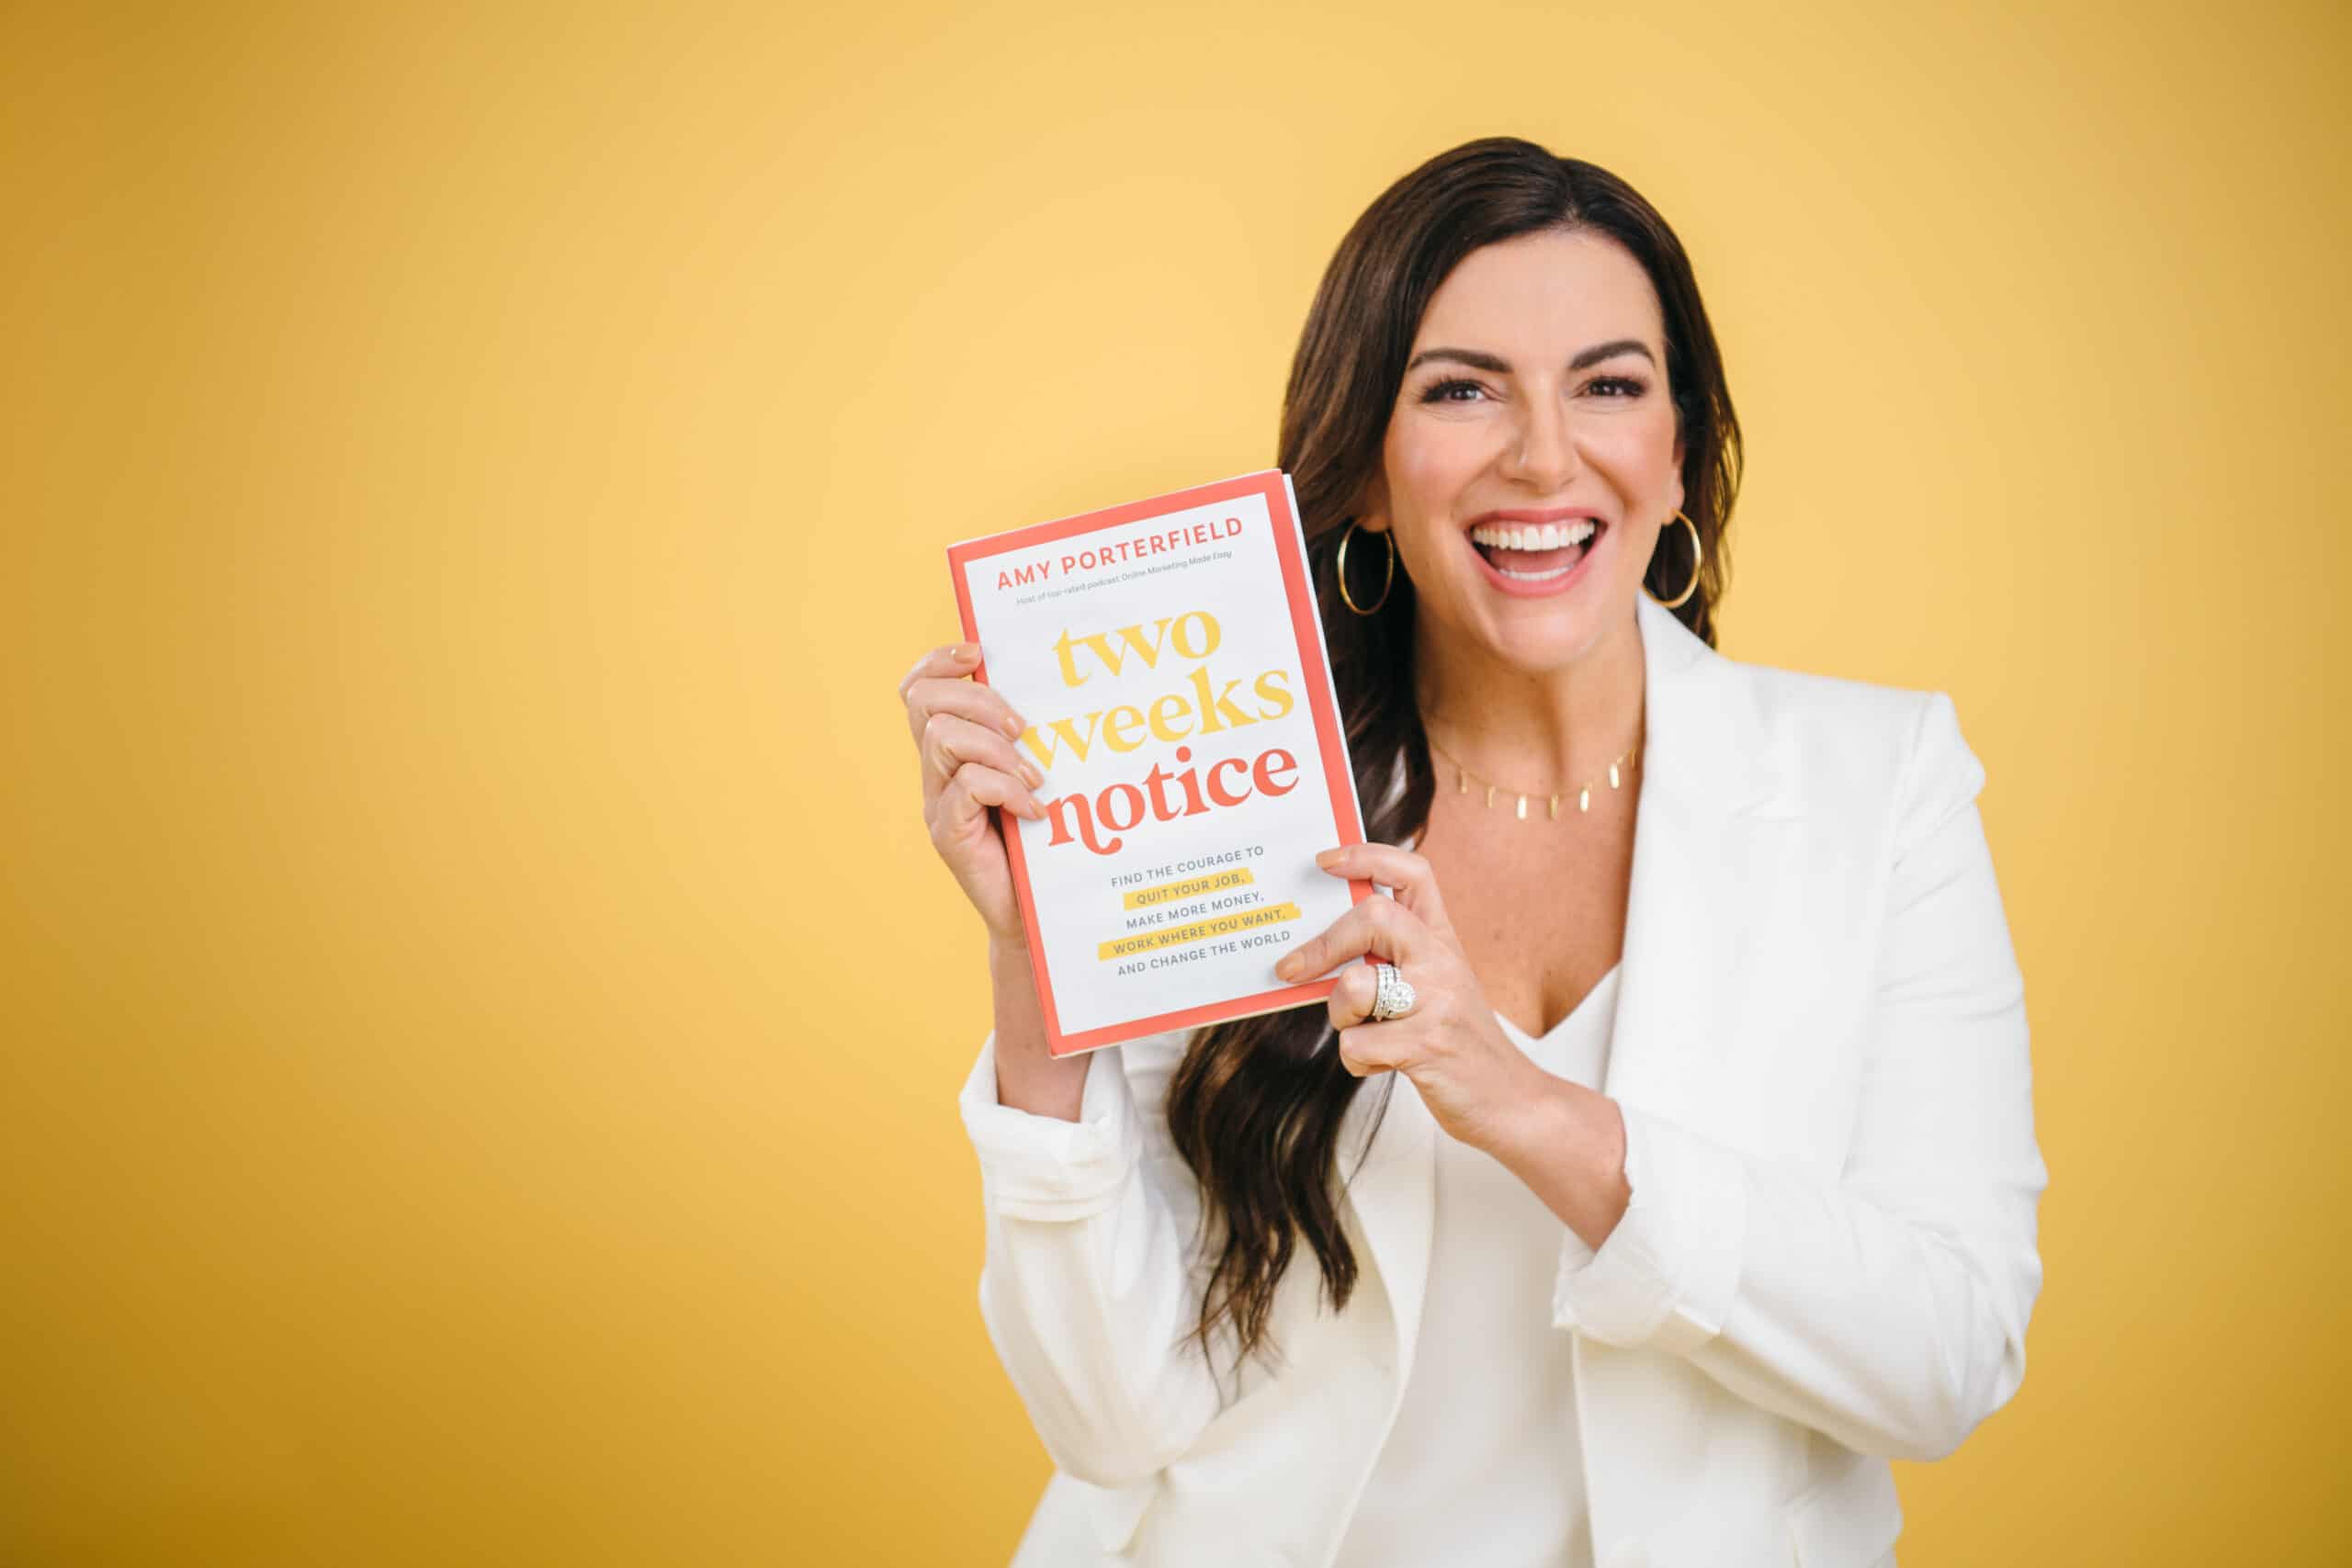 amy porterfield holding her book two weeks notice